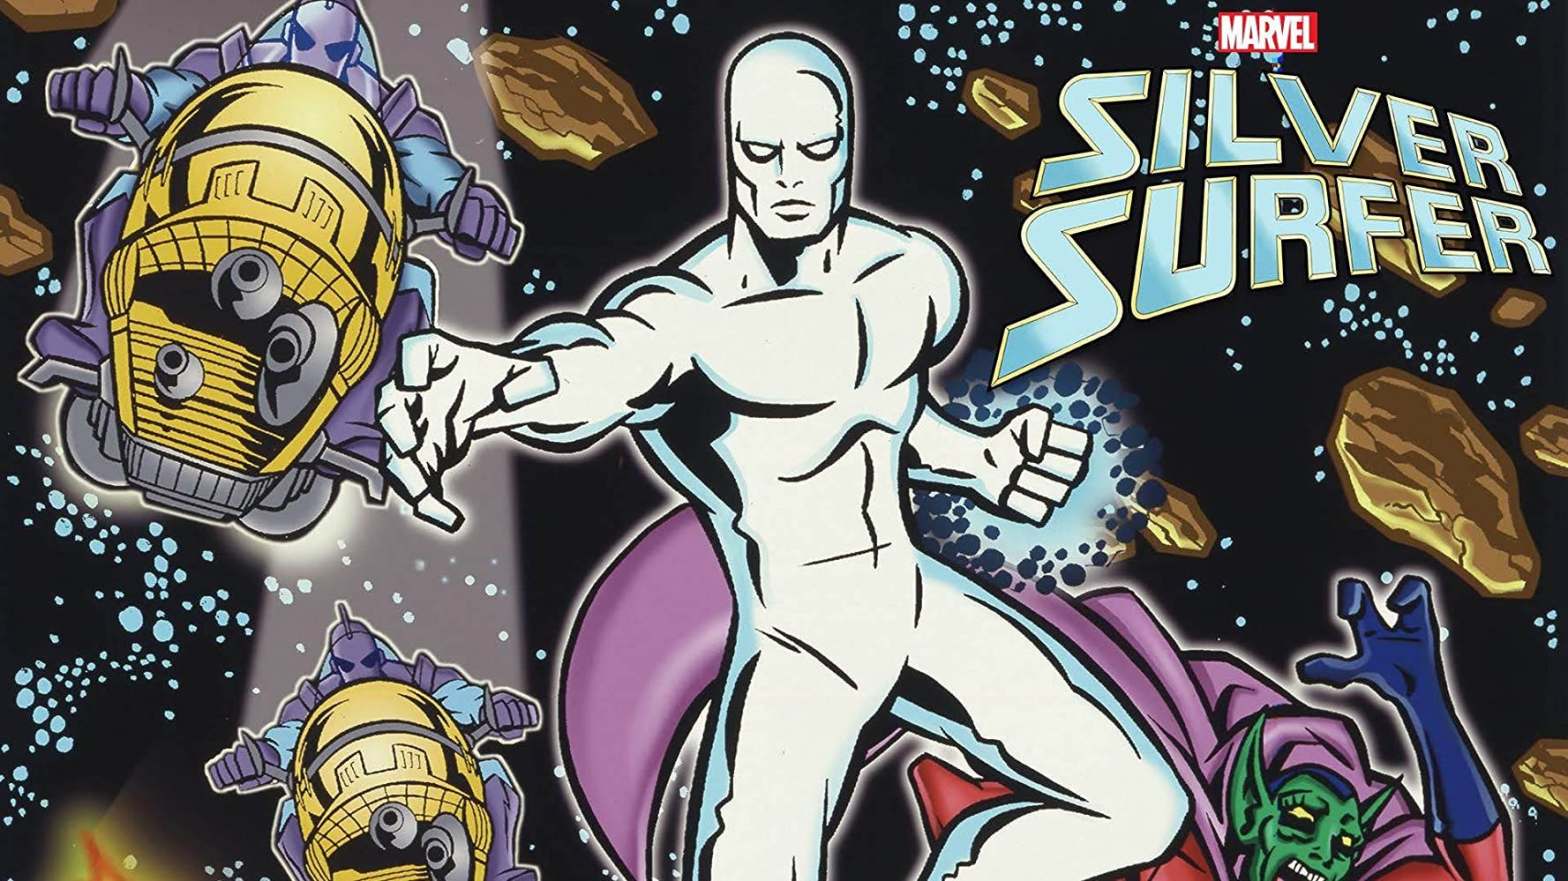 SILVER SURFER 98 VINTAGE TV SERIES ANIMATION HAND PAINTED PRODUCTION ART  MARVEL